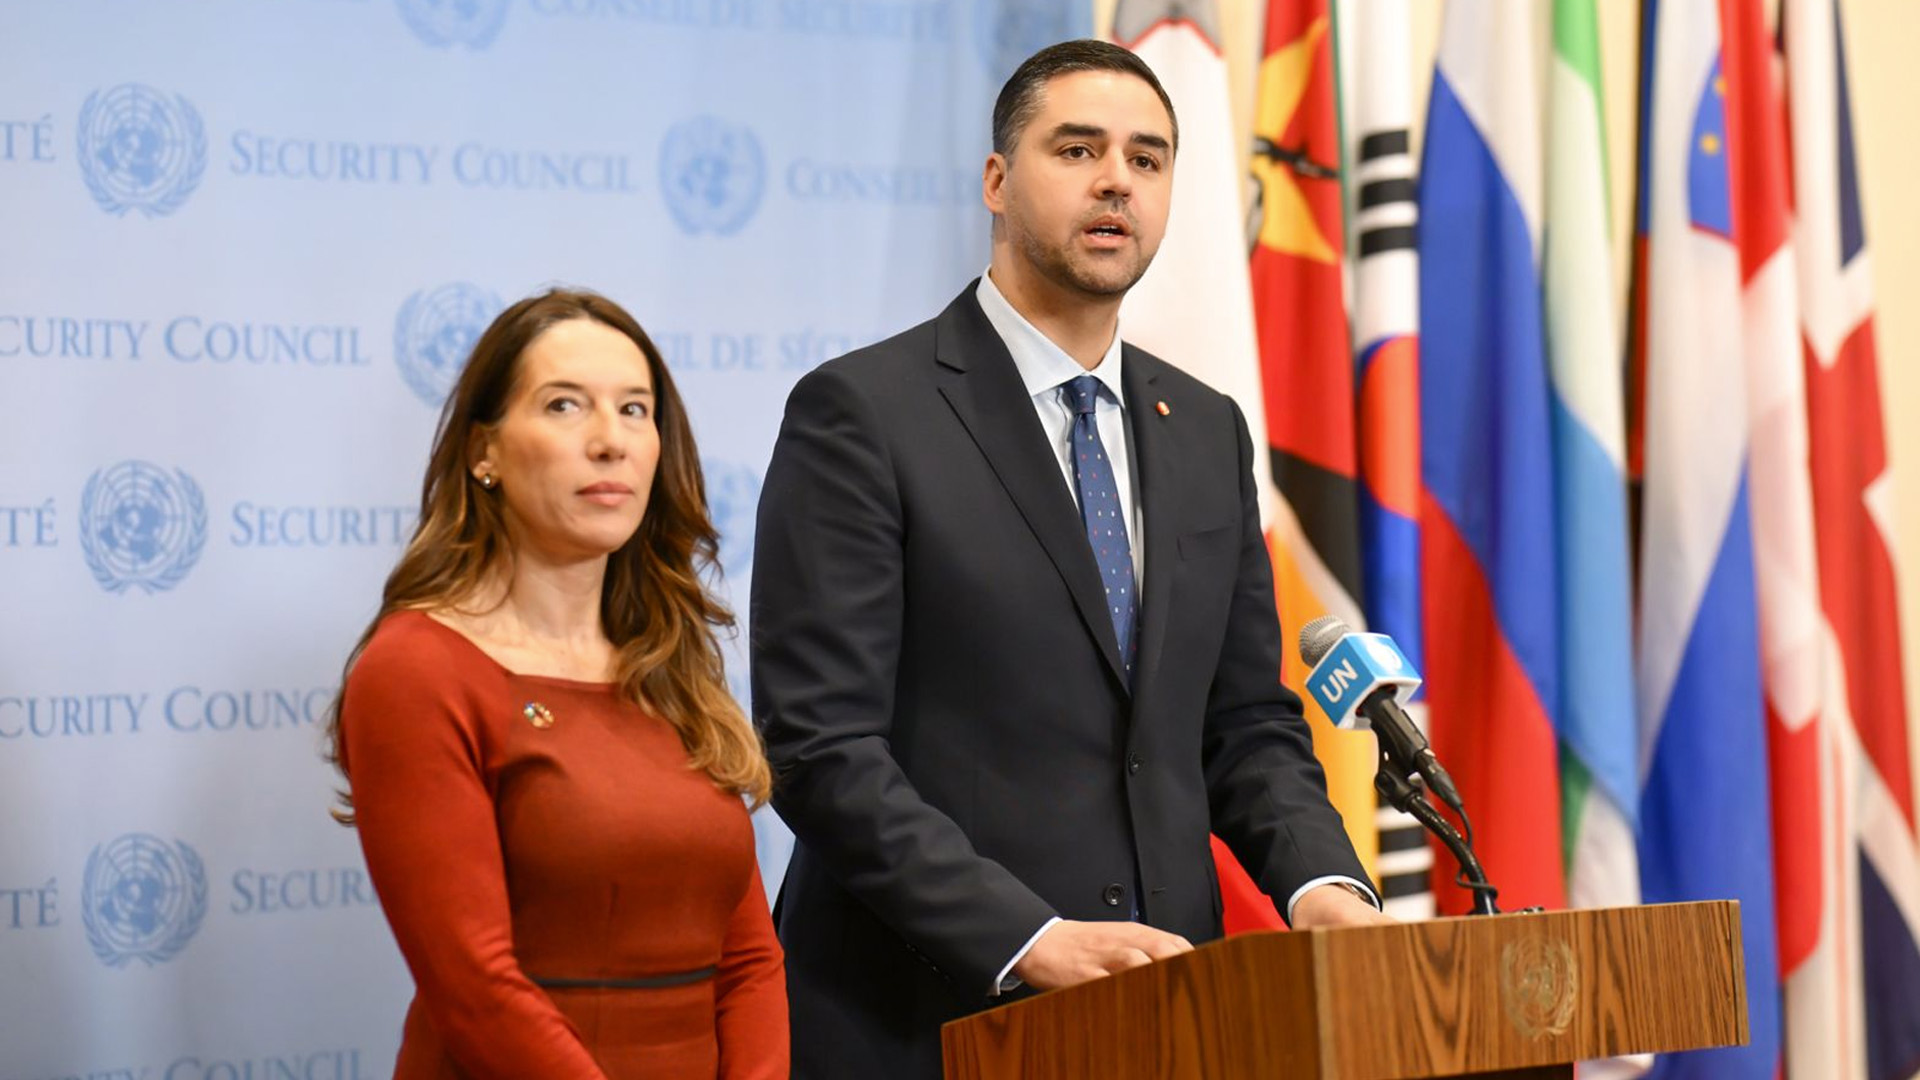 Malta's Role As UN Security Council President in NYC